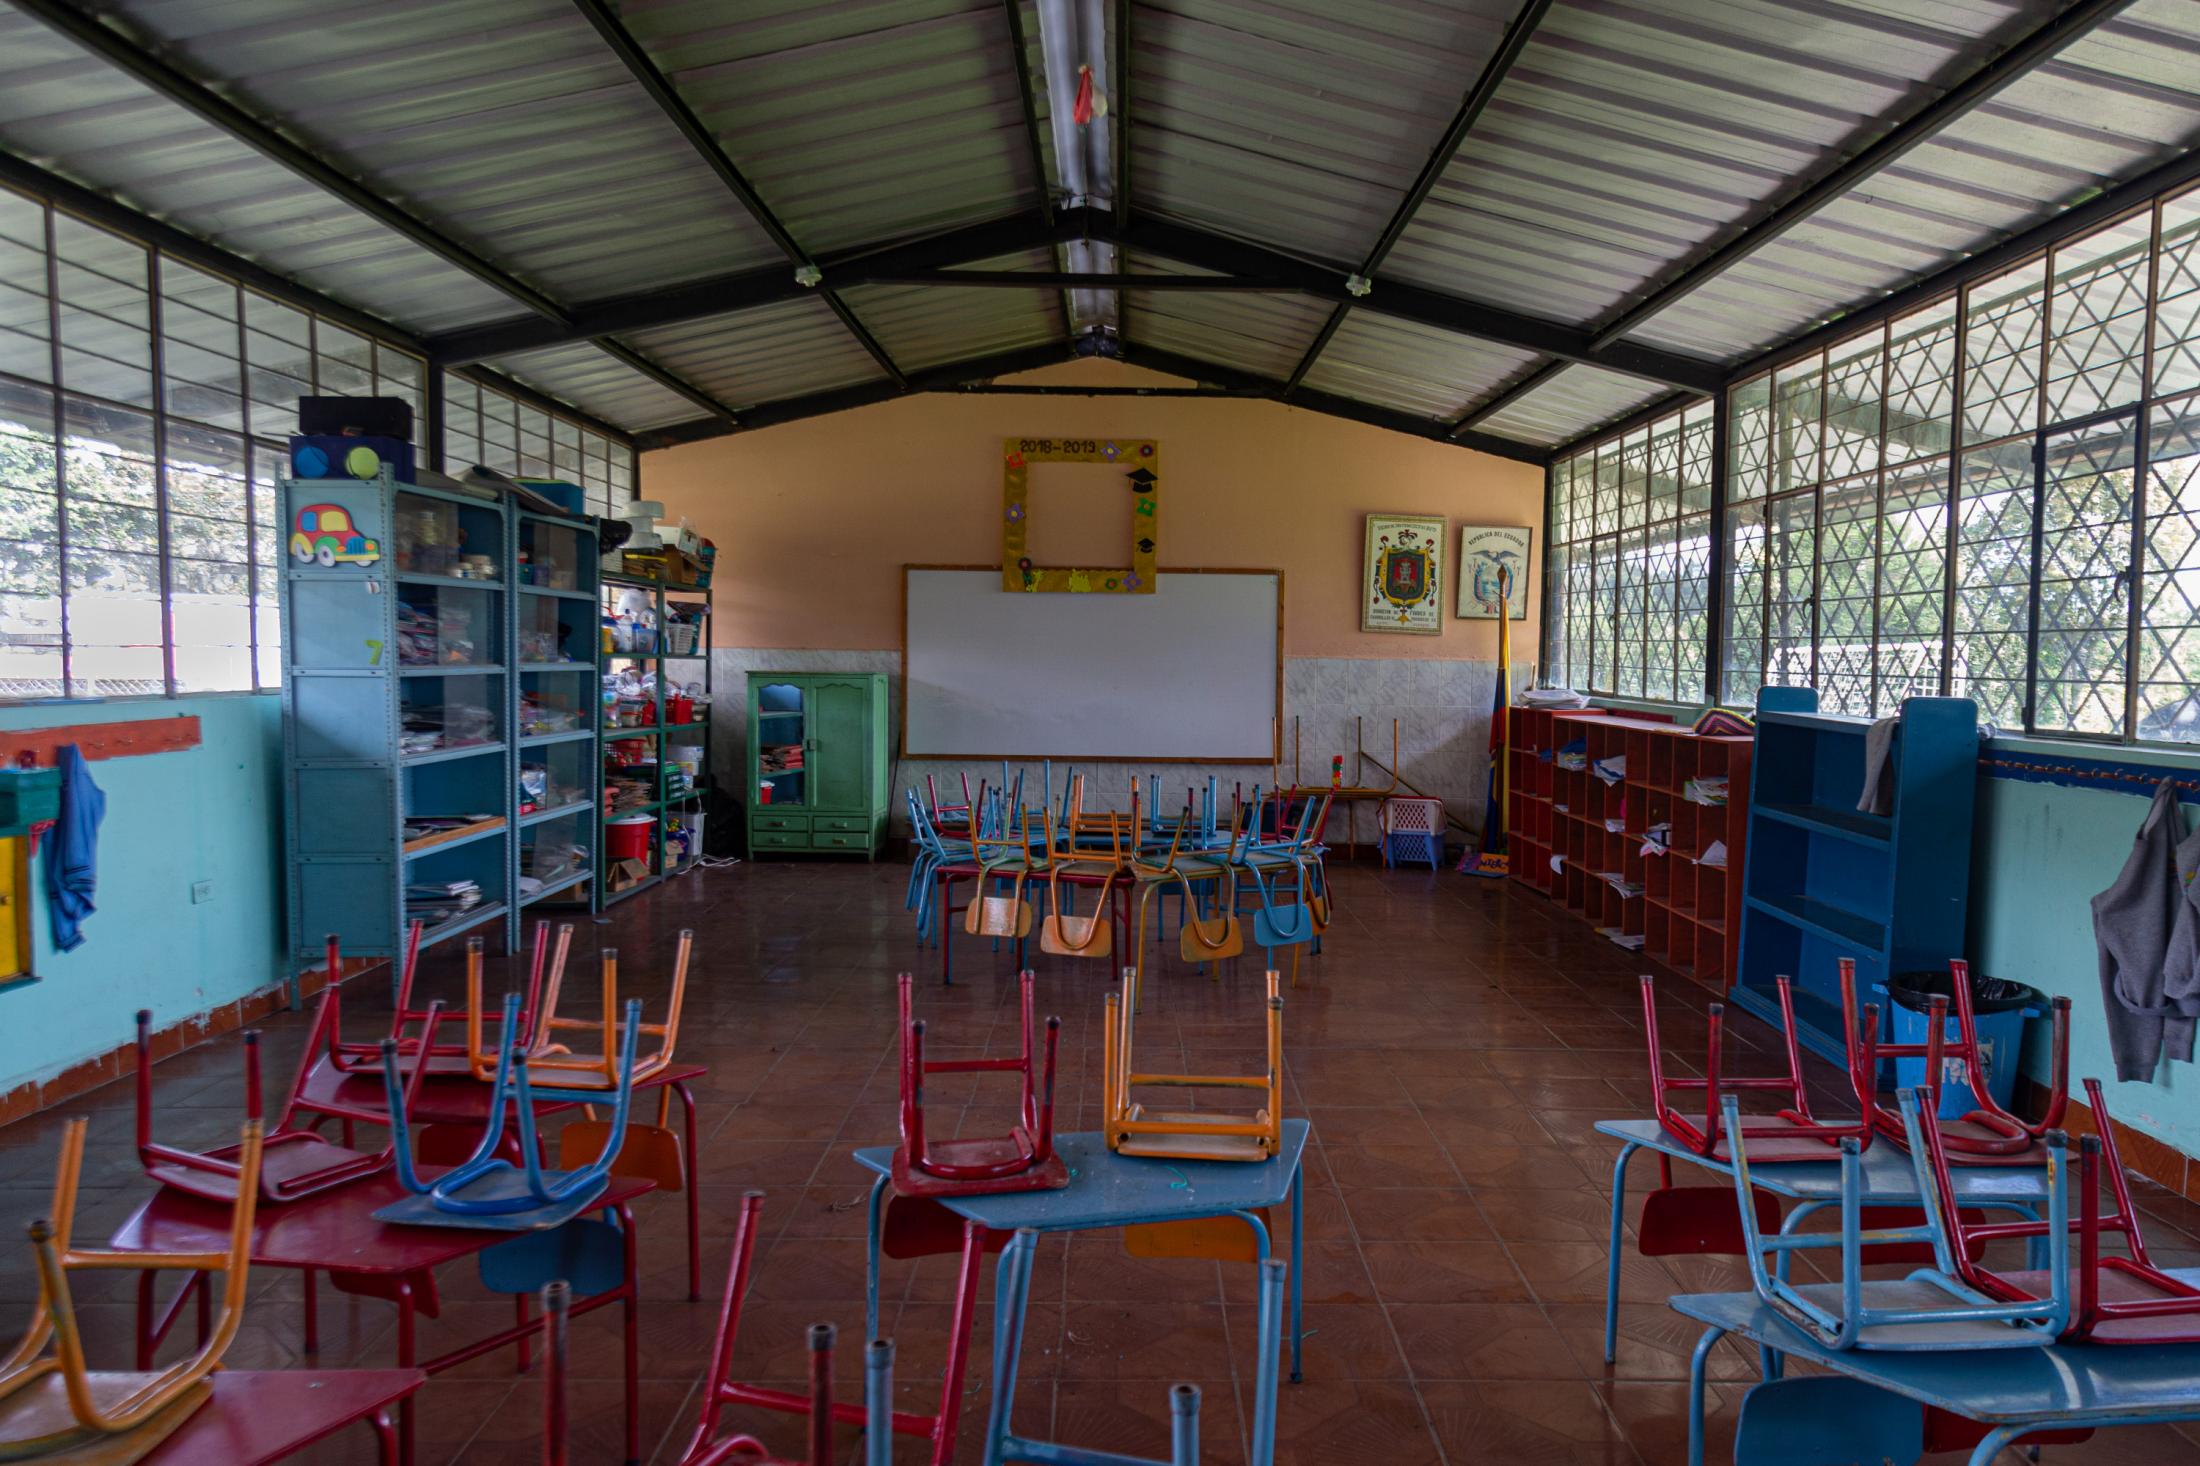 Education through Whatsapp  - One of the classrooms of Ruperto Alarcón...